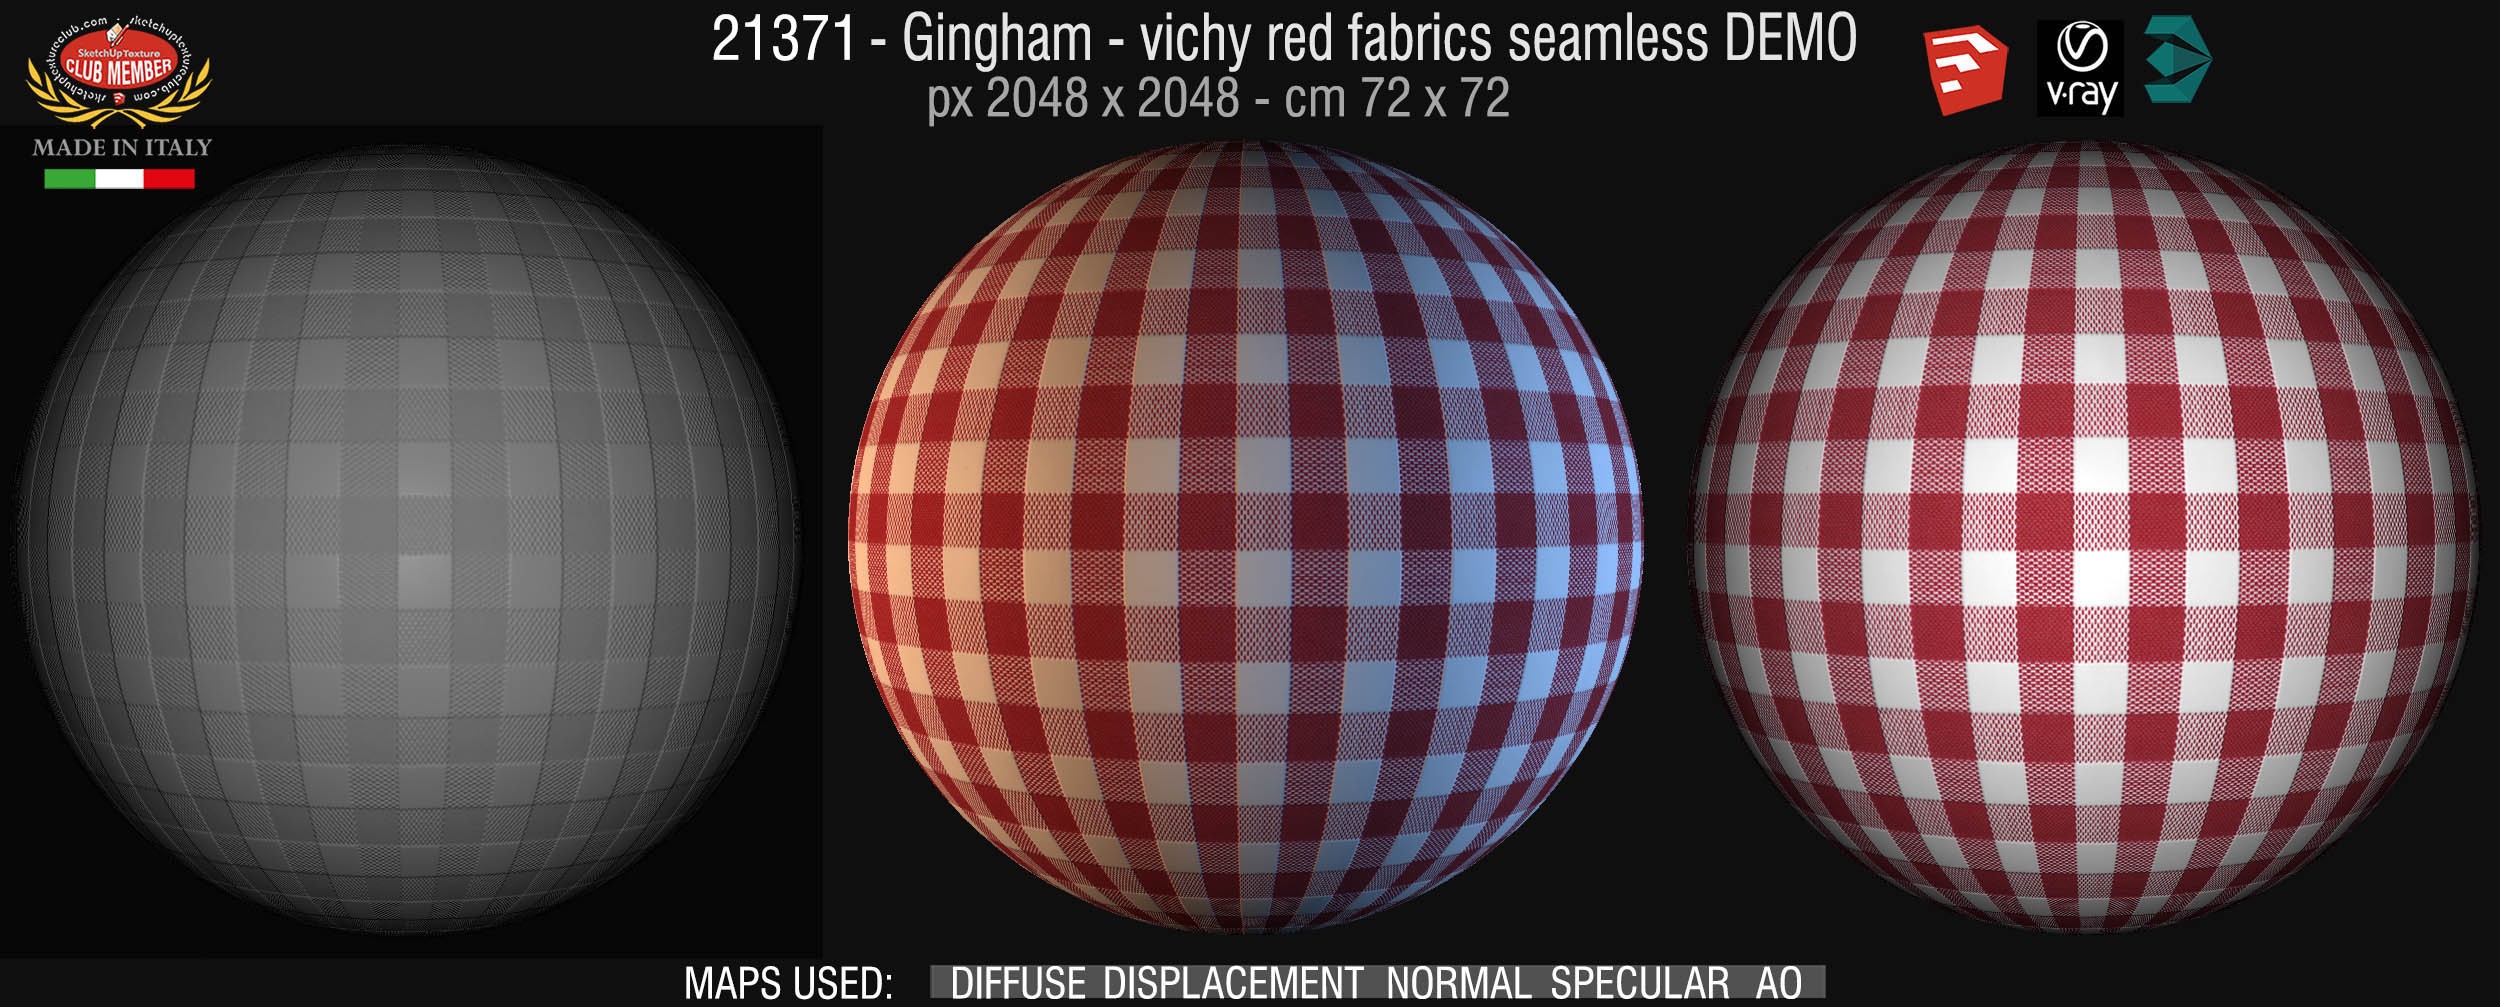 21371 Gingham vichy red fabrics texture seamless + maps DEMO